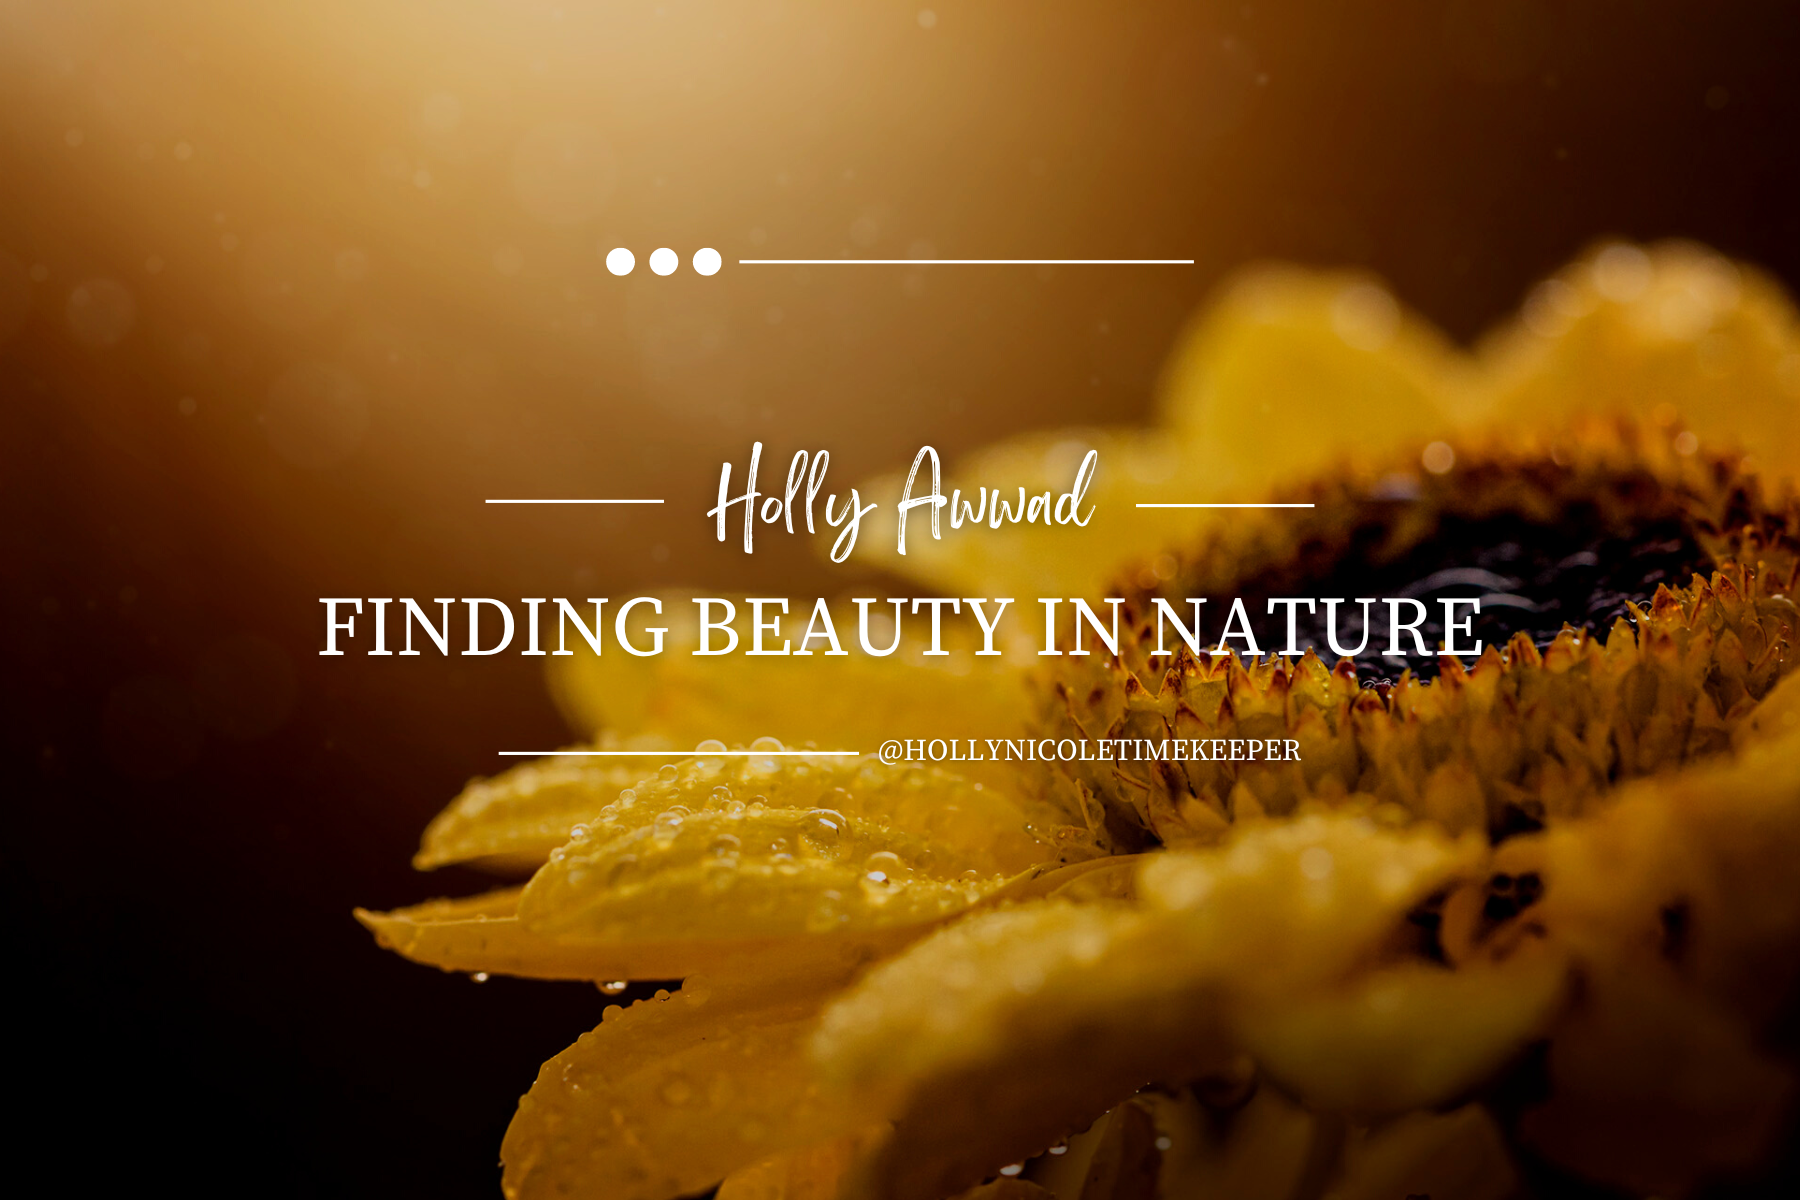 Finding Beauty in Nature by Holly Awwad